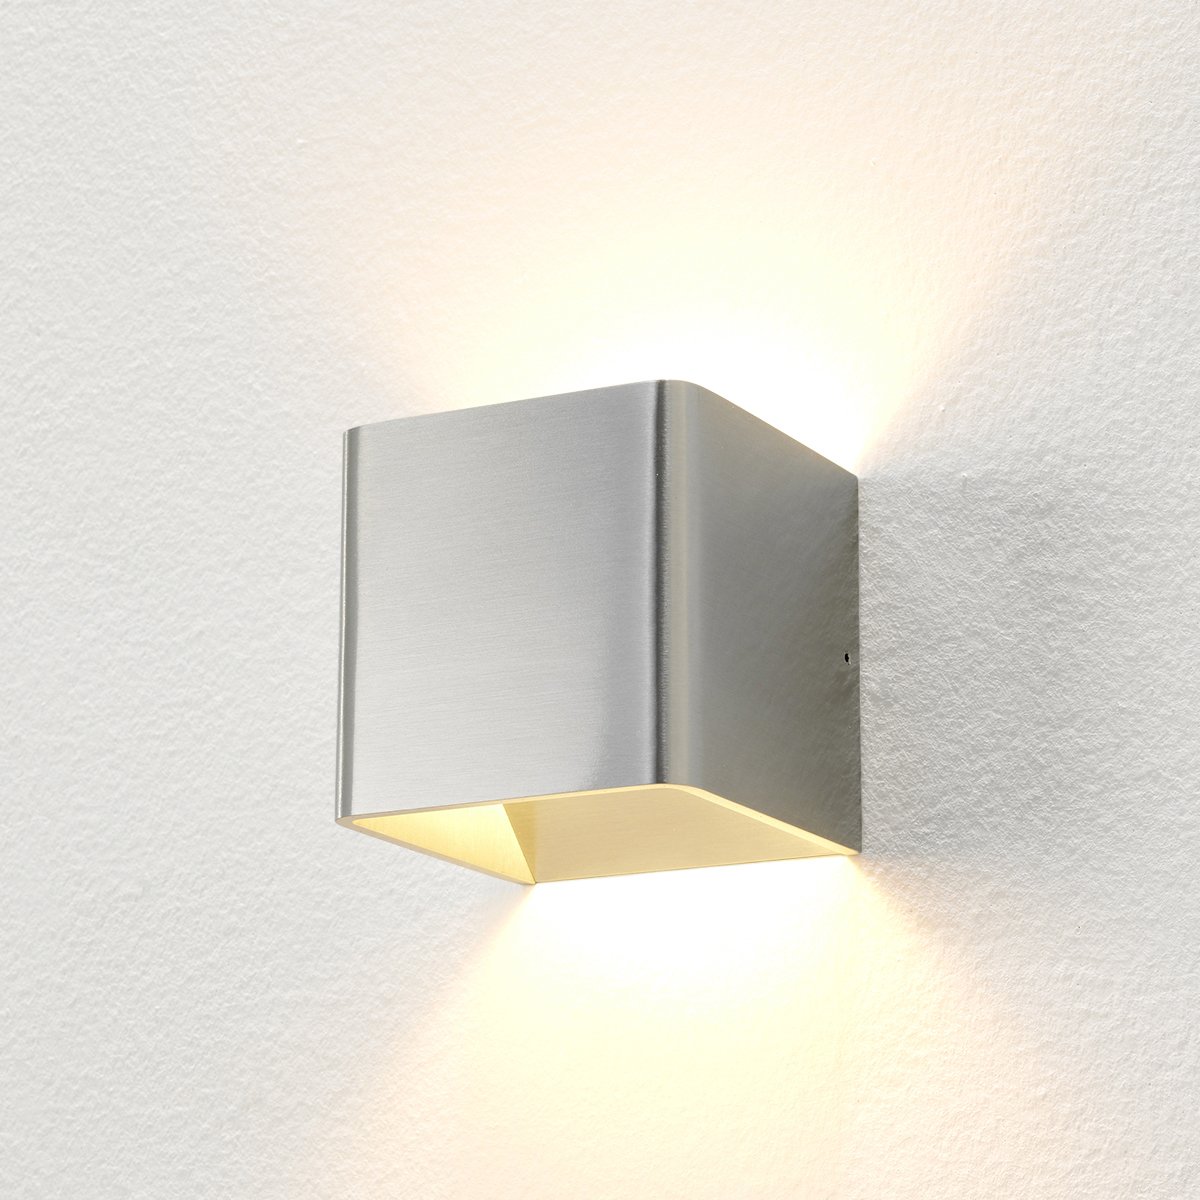 Wandverlichting | Wandlamp led up wit Carré - 10 | Manves.nl